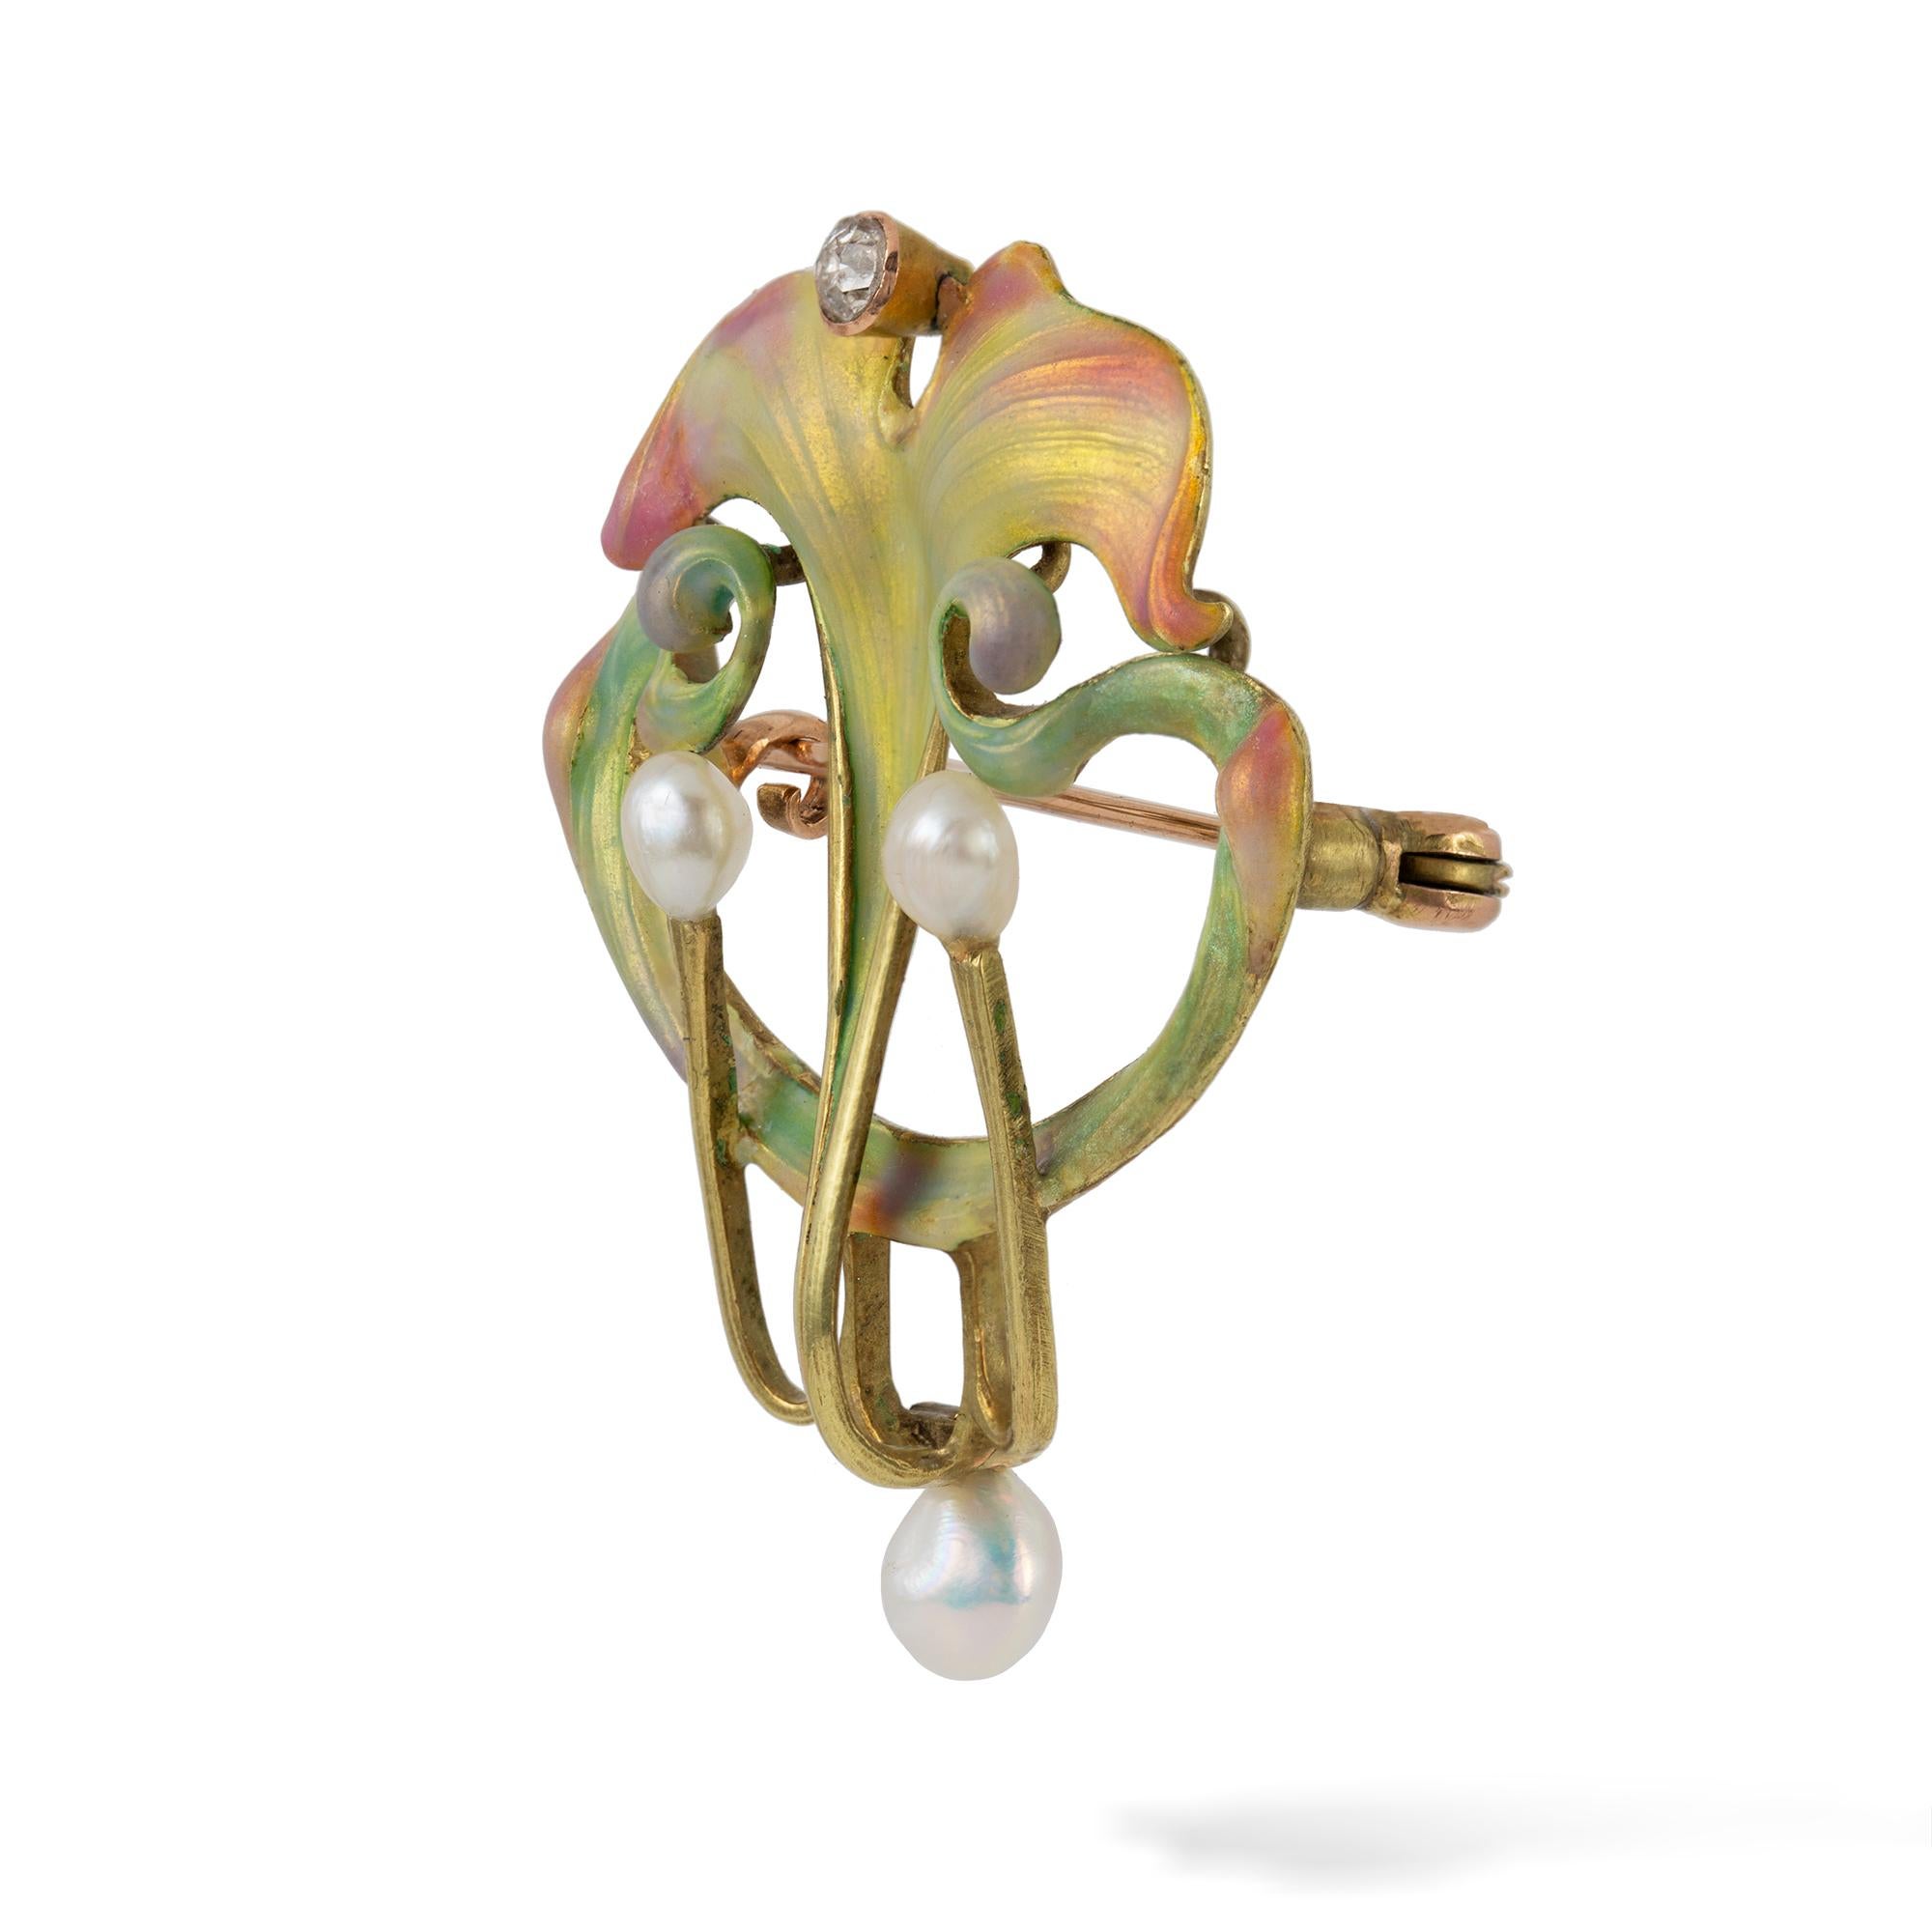 An Art Nouveau enamel, pearl and diamond brooch, with opalescent shaded enamel sinuous curling leaves in pale pink, green and gold, set on the top with an old-cut diamond  estimated to weigh 0.15 carats and flanked with three natural freshwater